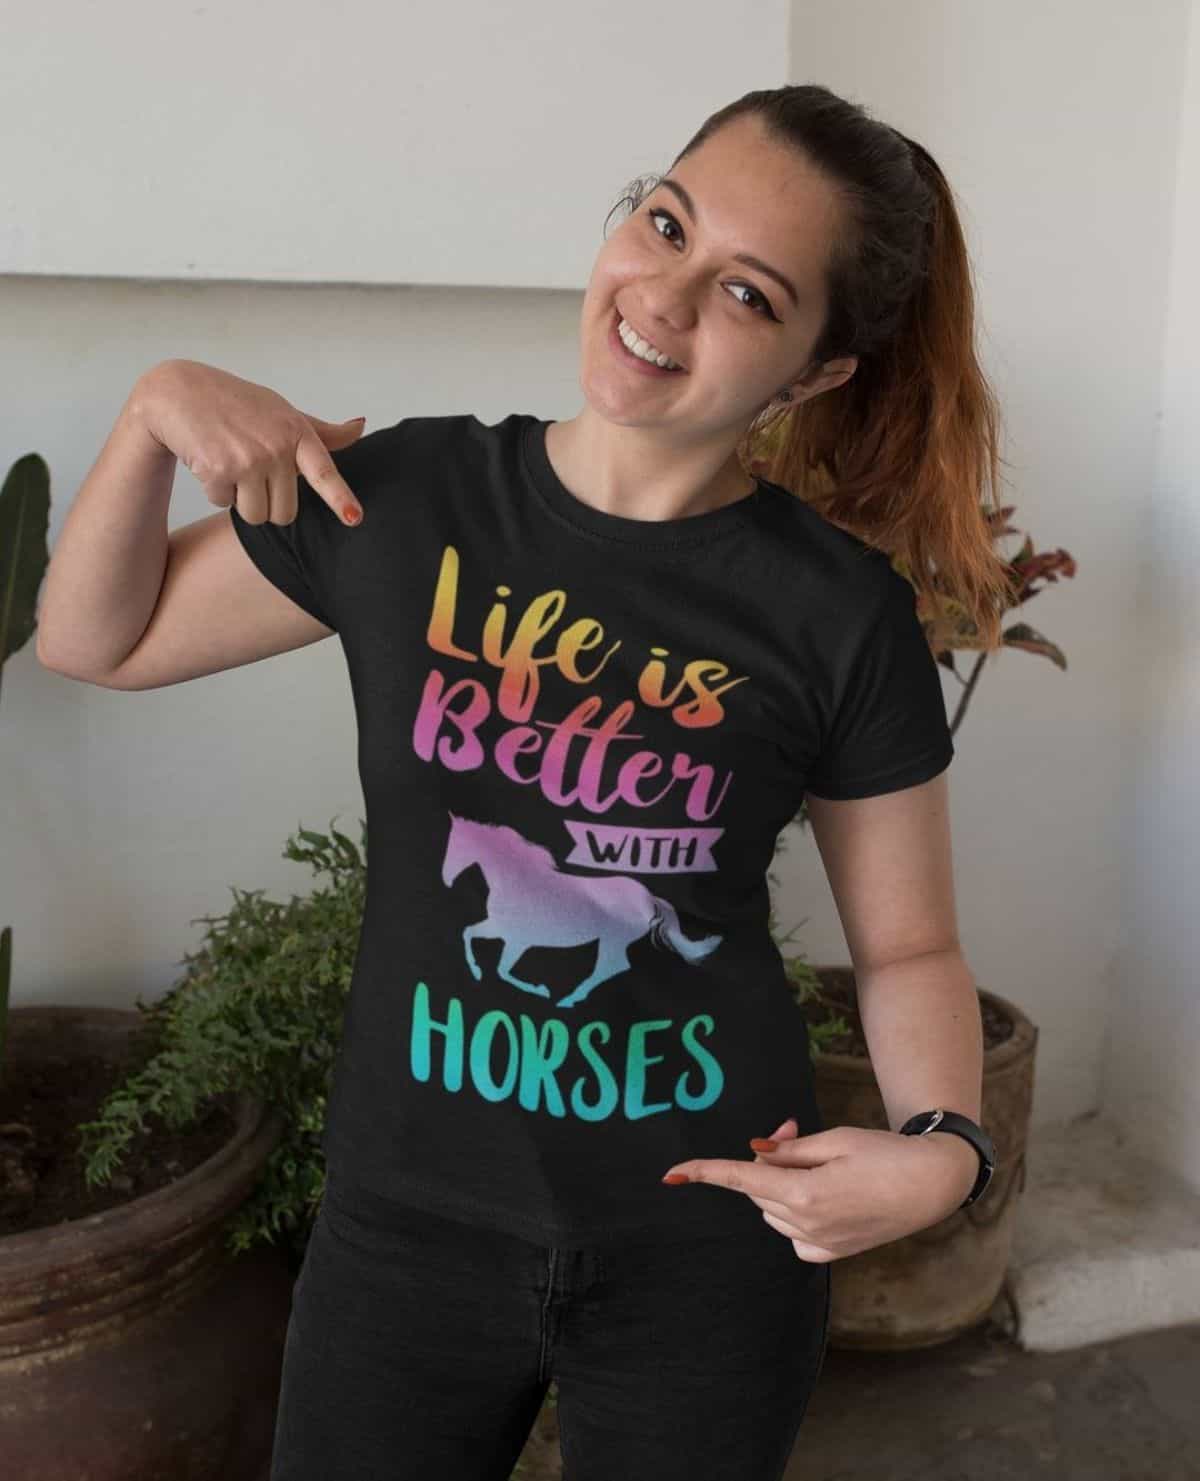 A young woman wears a horse-inspired shirt.